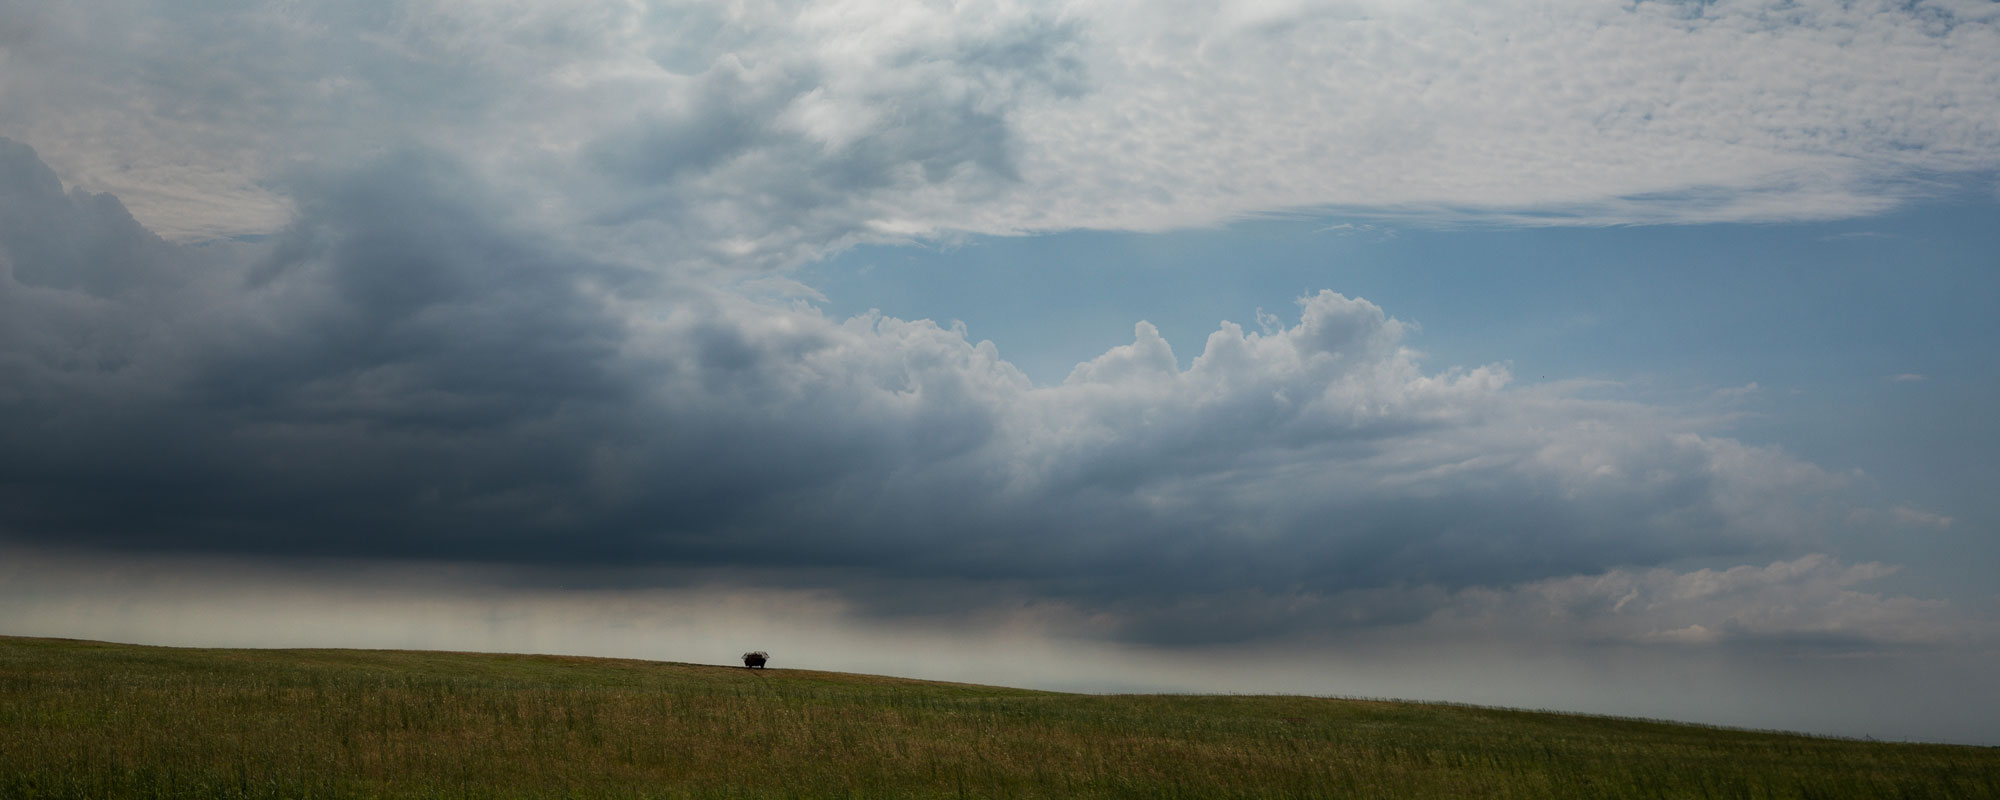 Mesonet Collects Weather Data in Real-Time